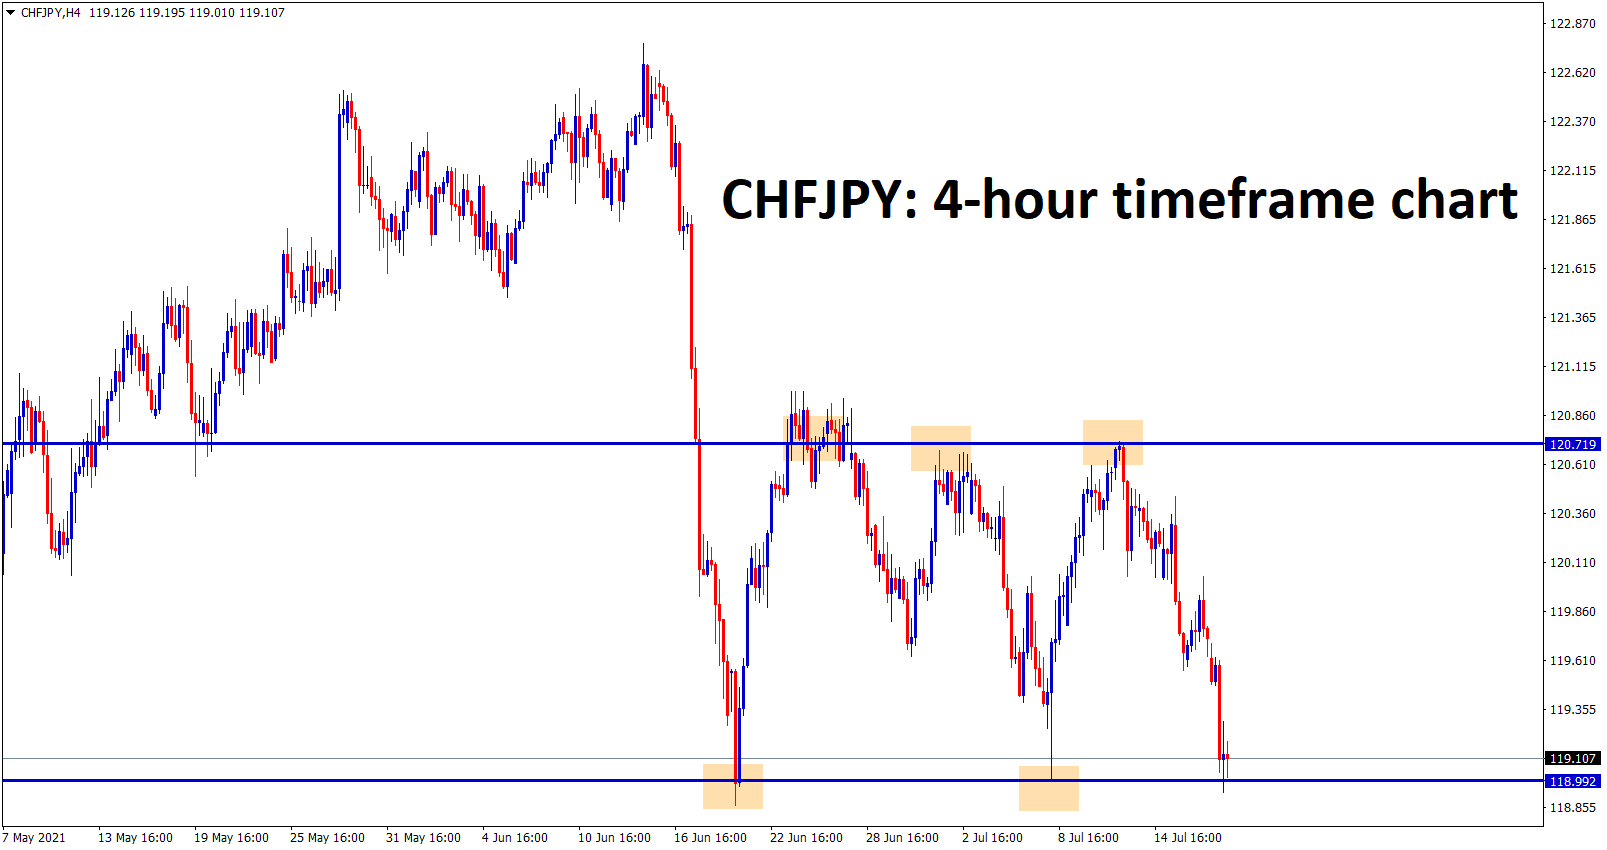 CHFJPY is standing now at the support zone wait for breakout or reversal confirmation